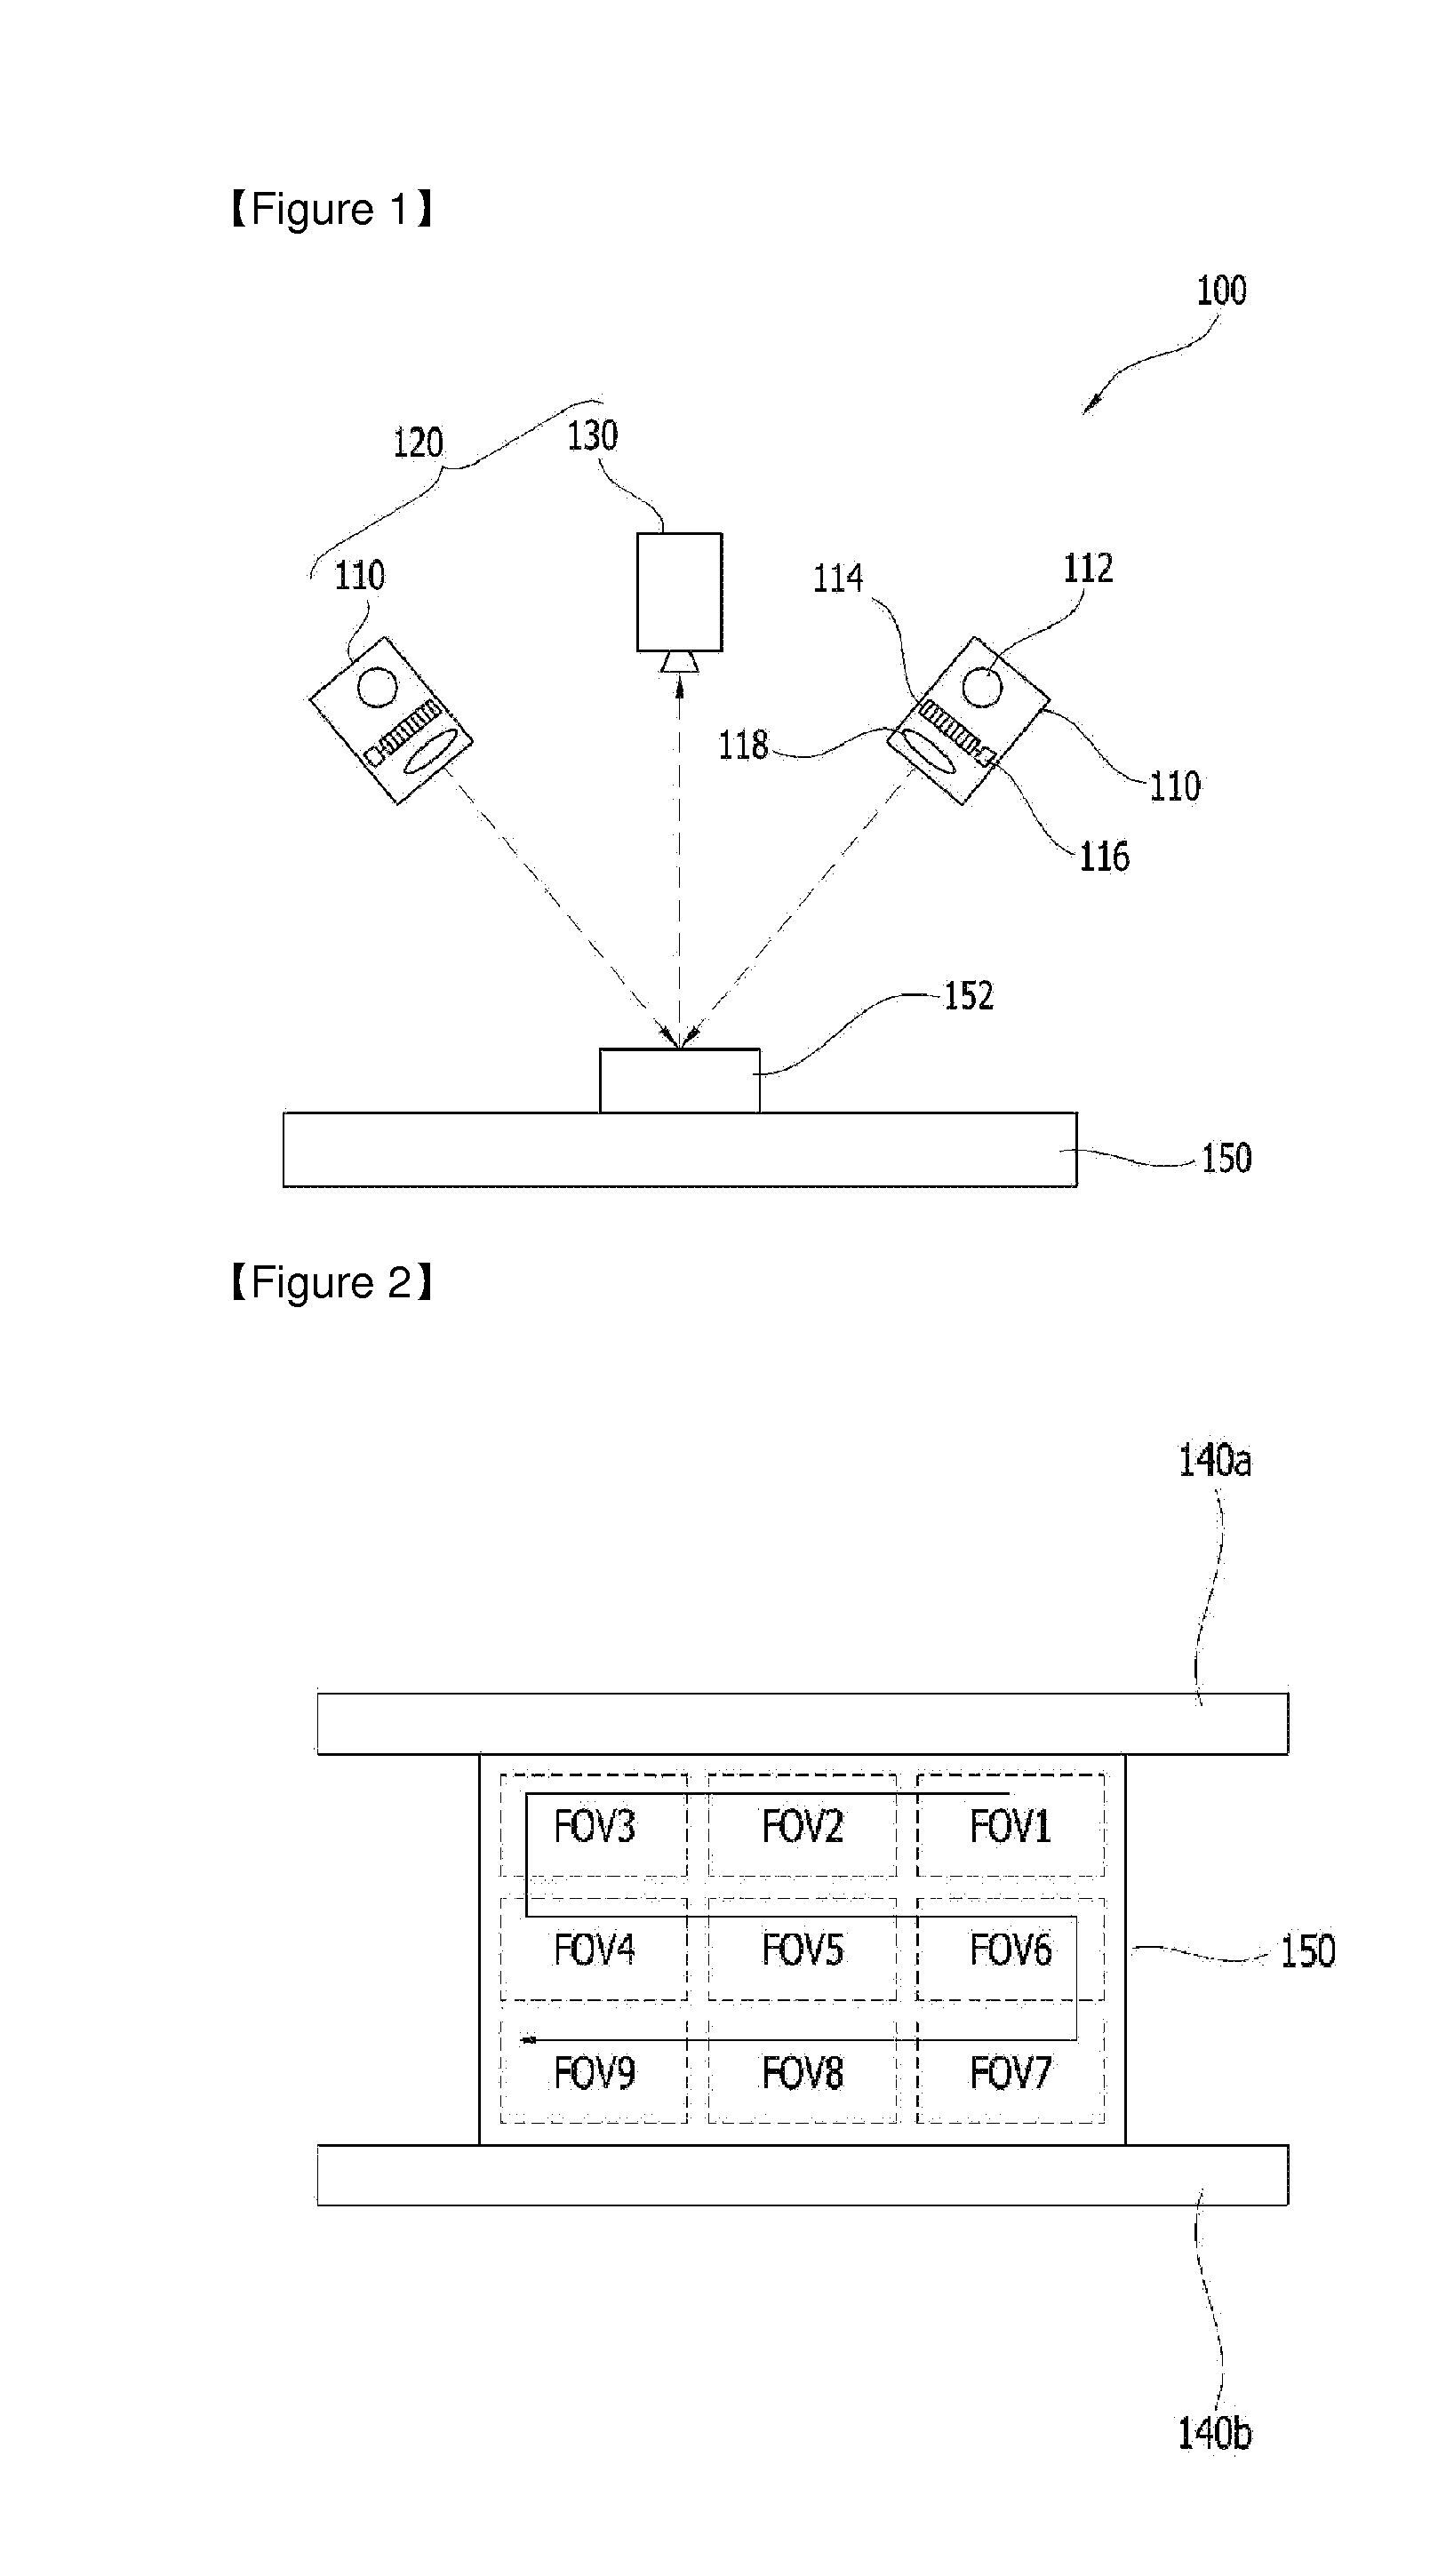 Method of inpsecting a substrate